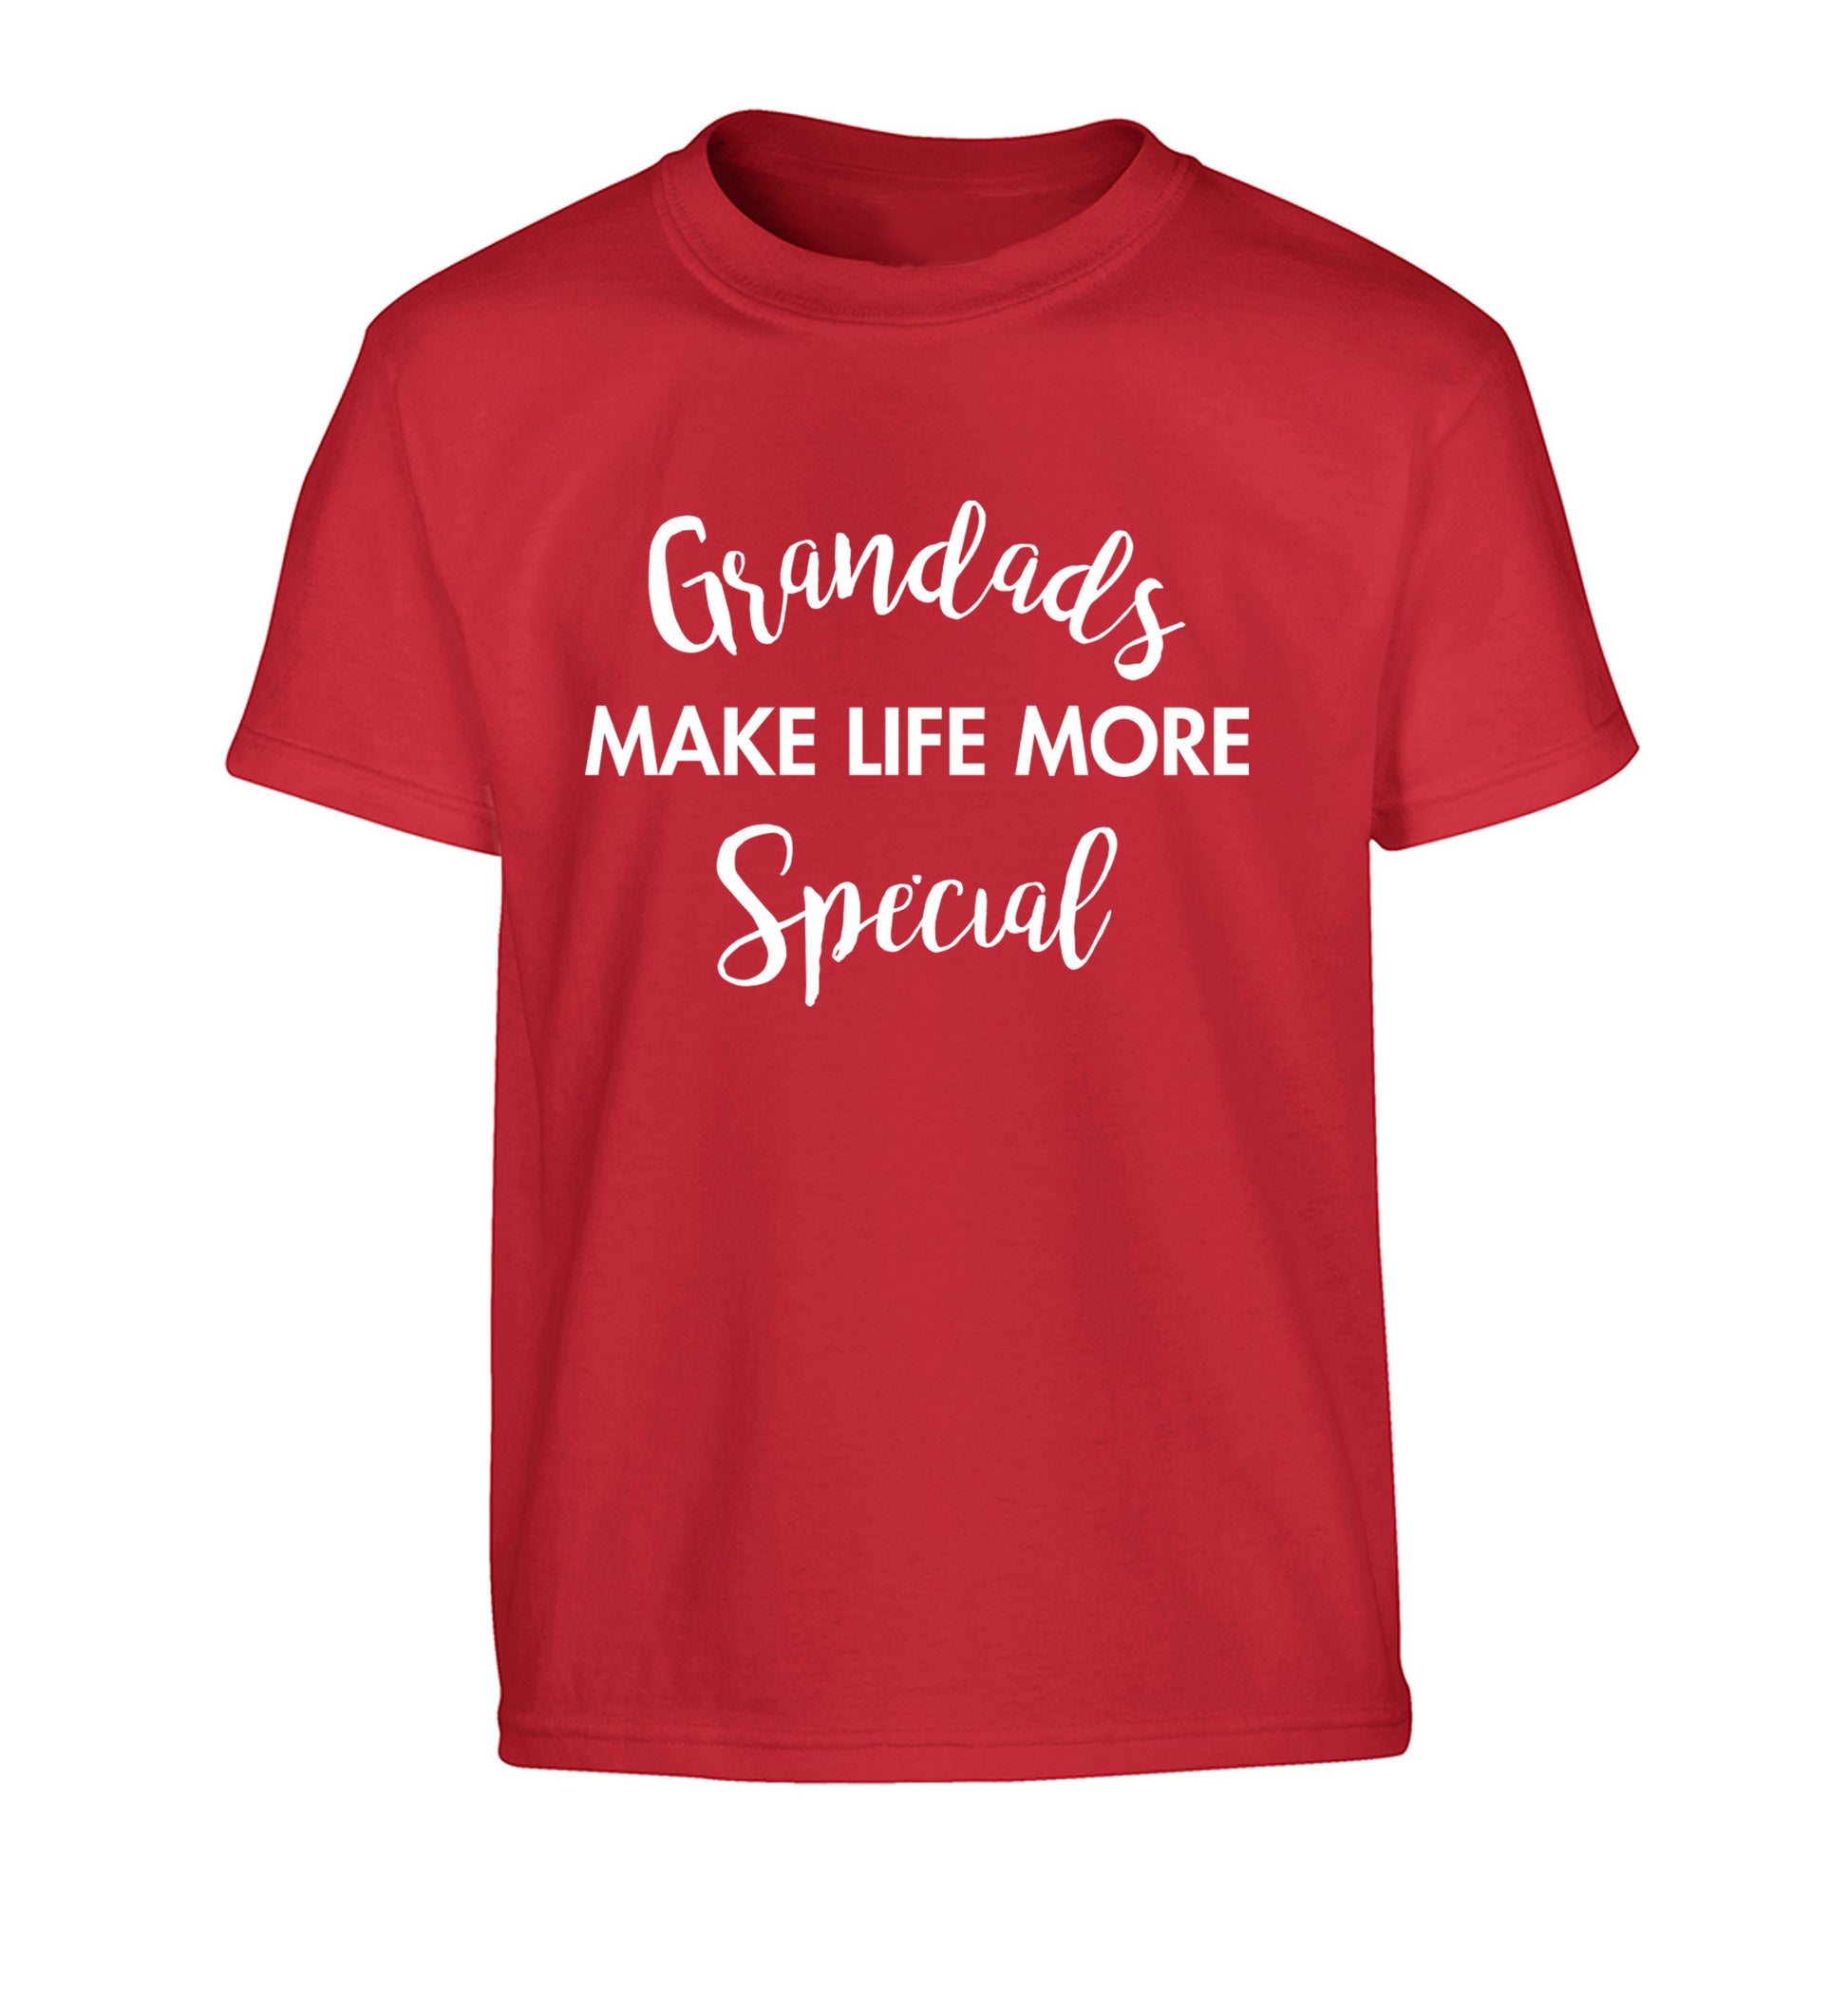 Grandads make life more special Children's red Tshirt 12-14 Years